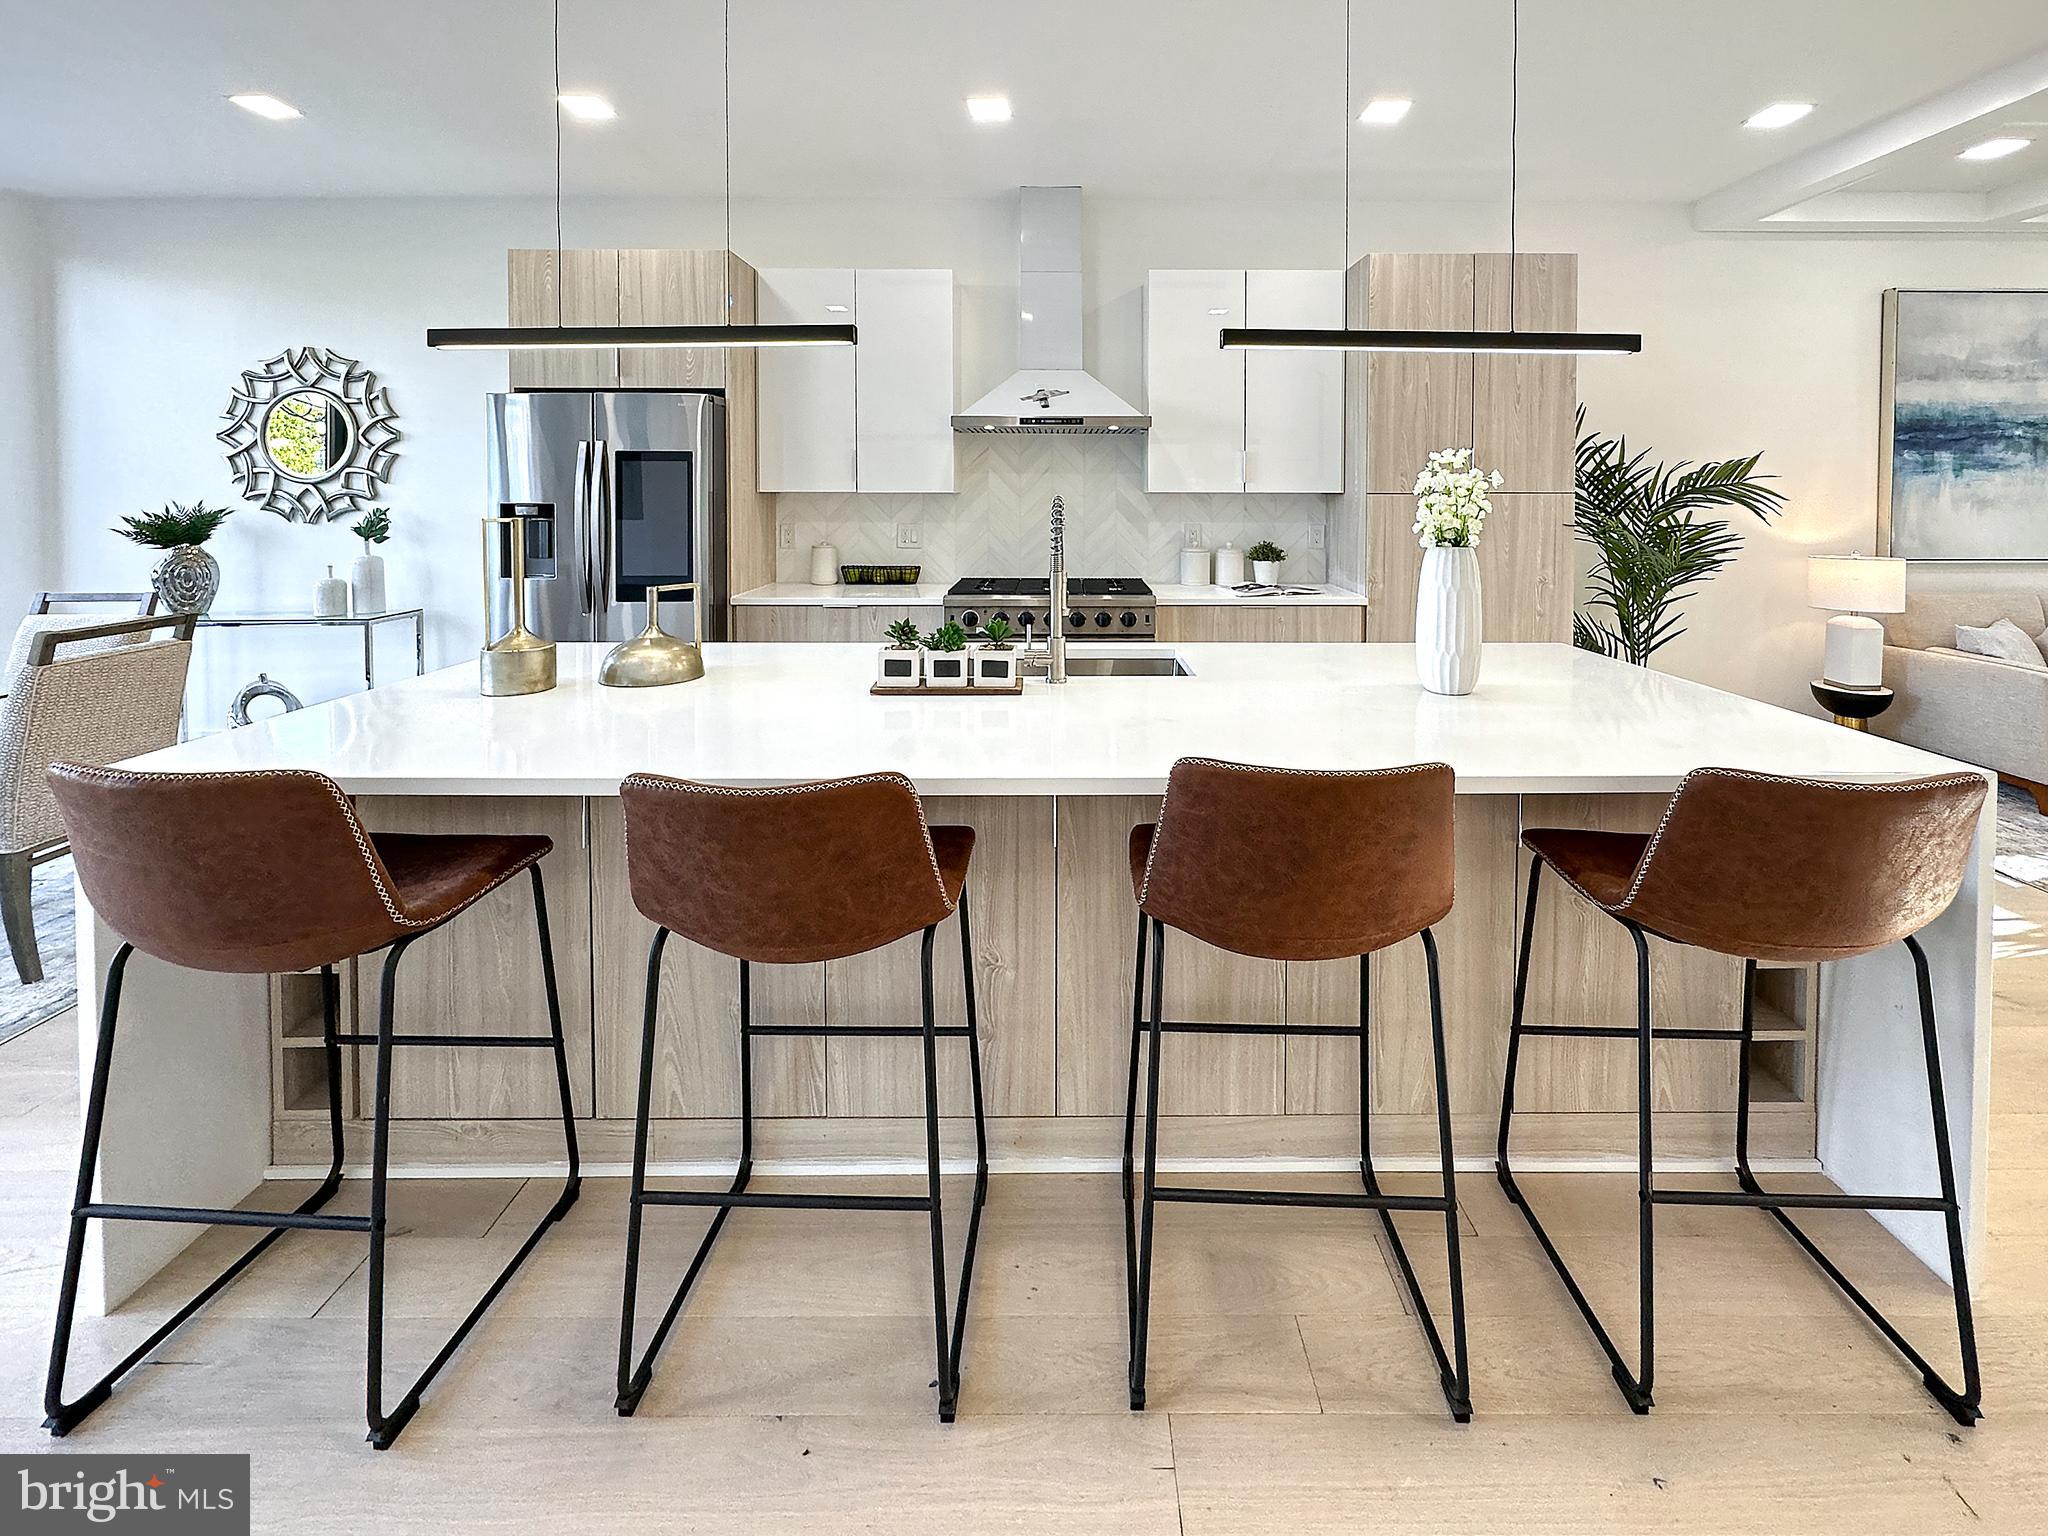 a kitchen with stainless steel appliances kitchen island a table chairs sink and cabinets